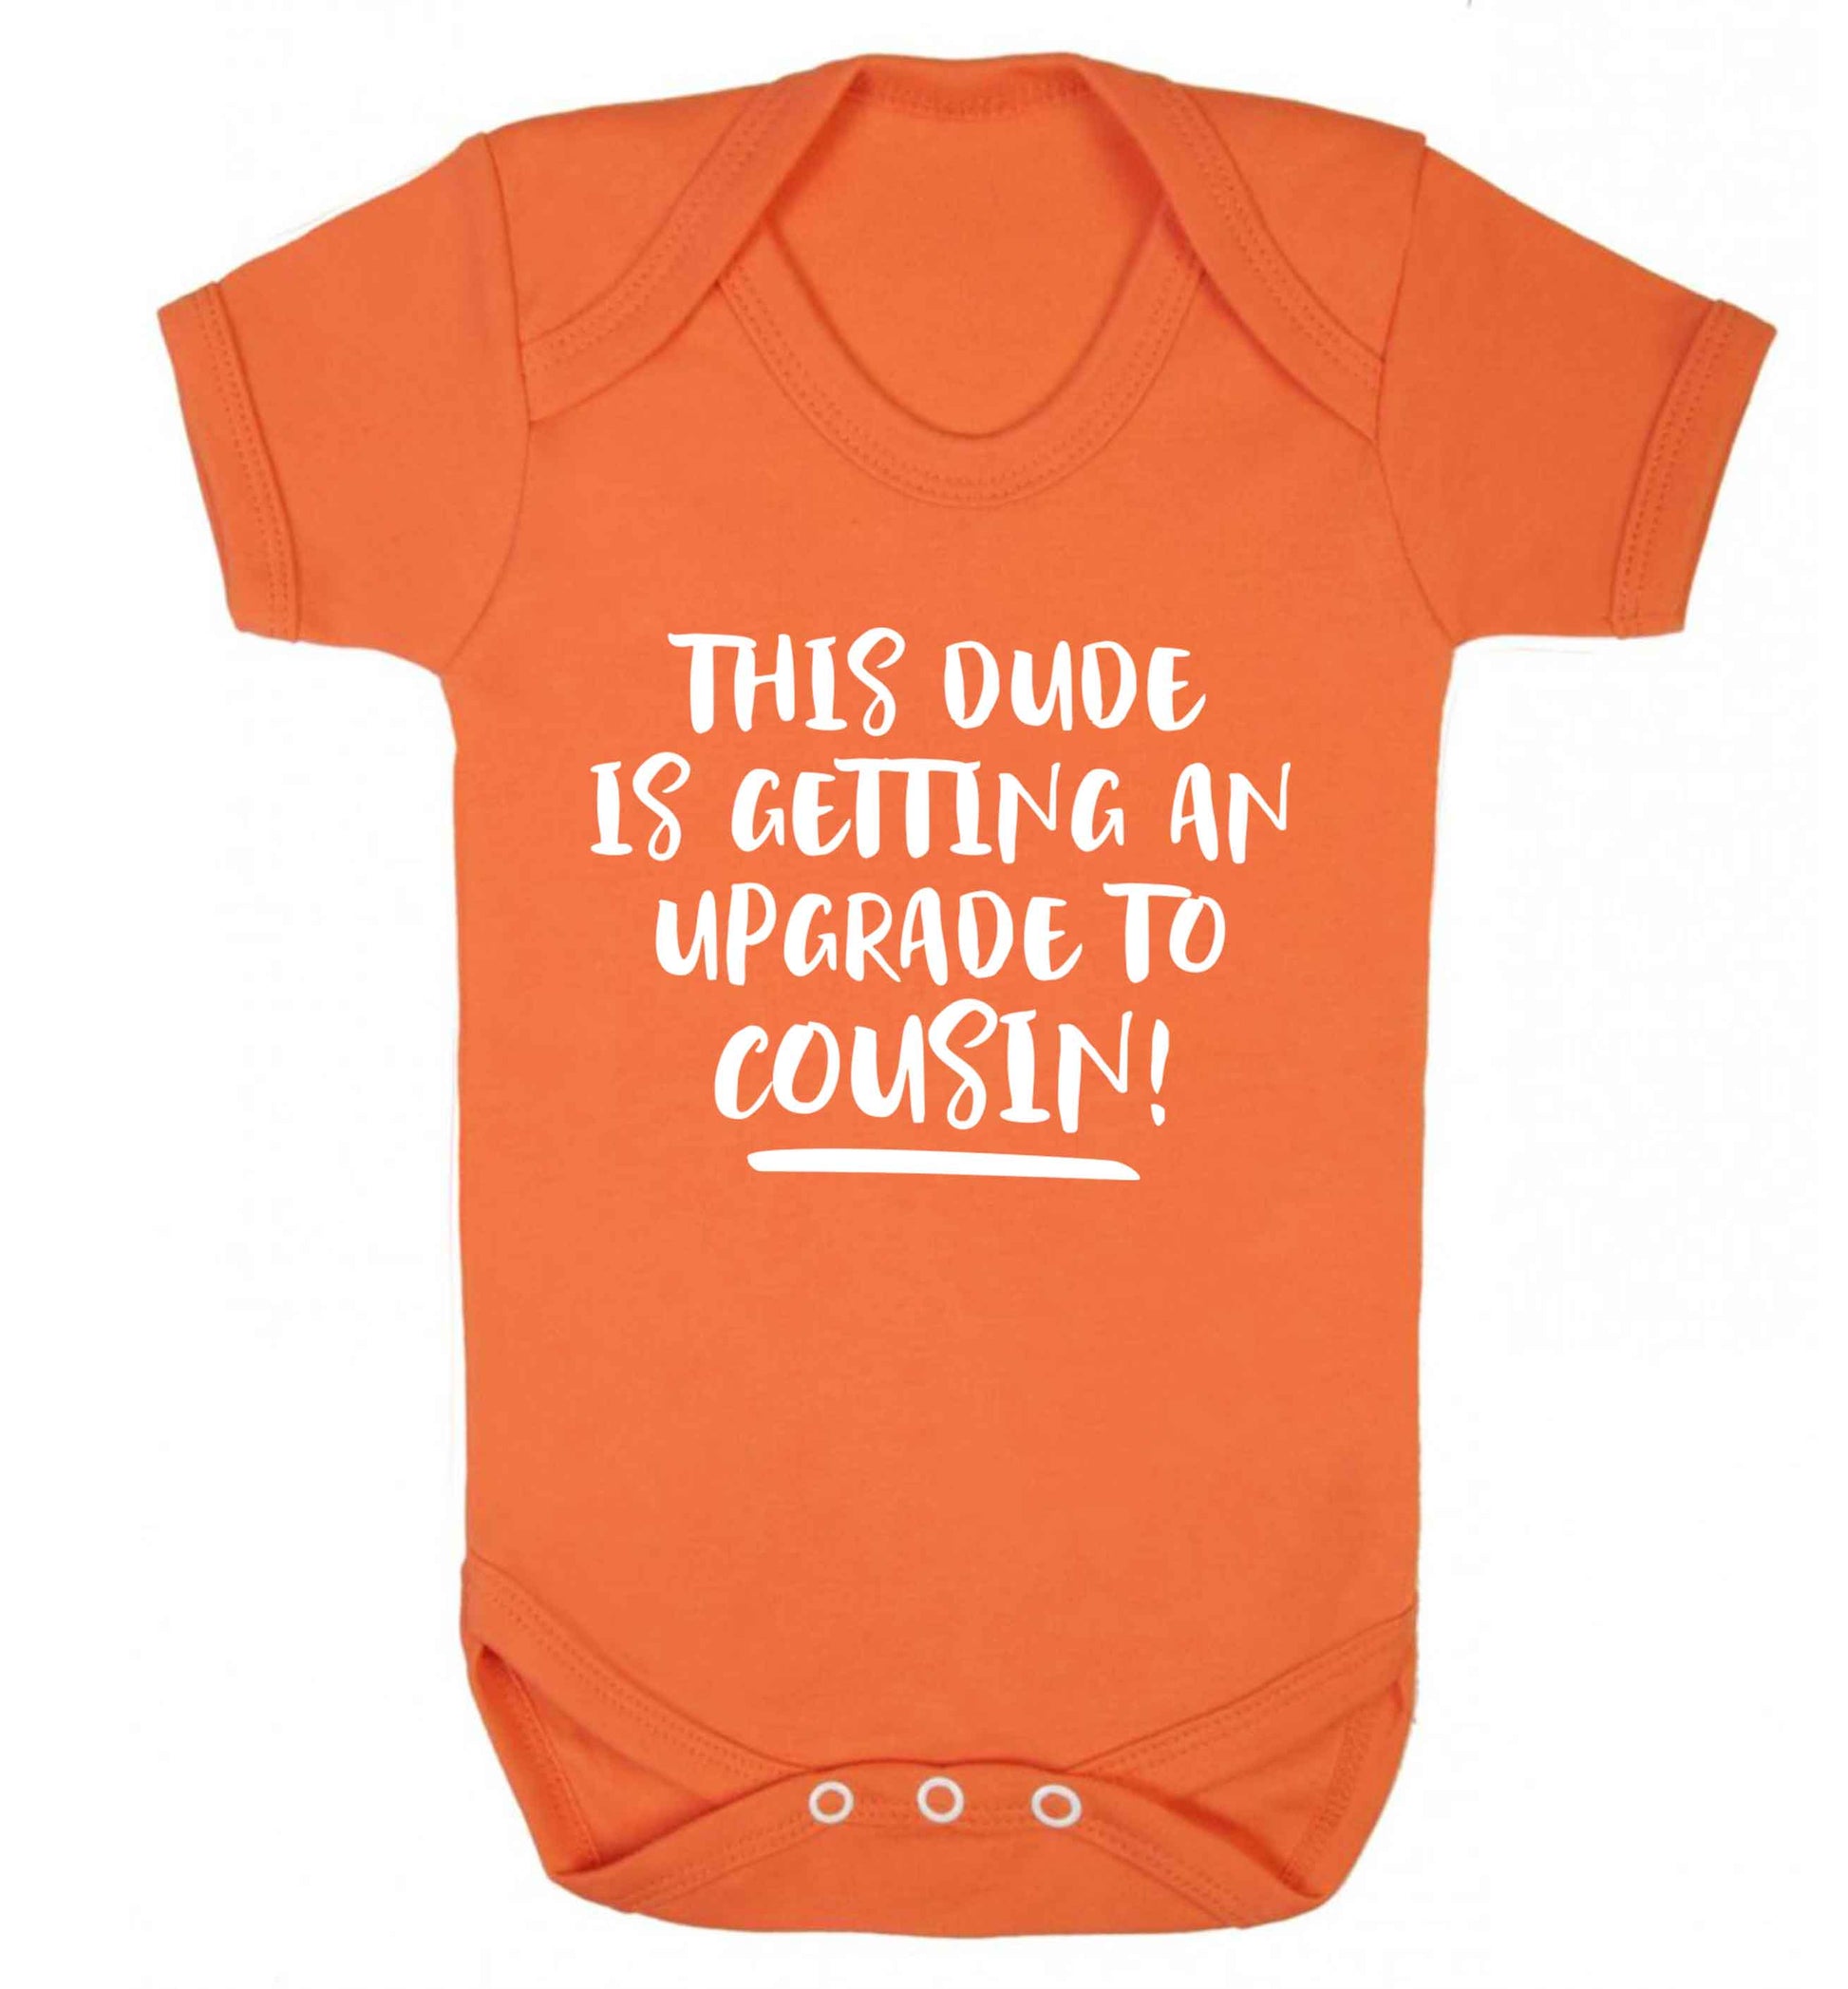 This dude is getting an upgrade to cousin! Baby Vest orange 18-24 months